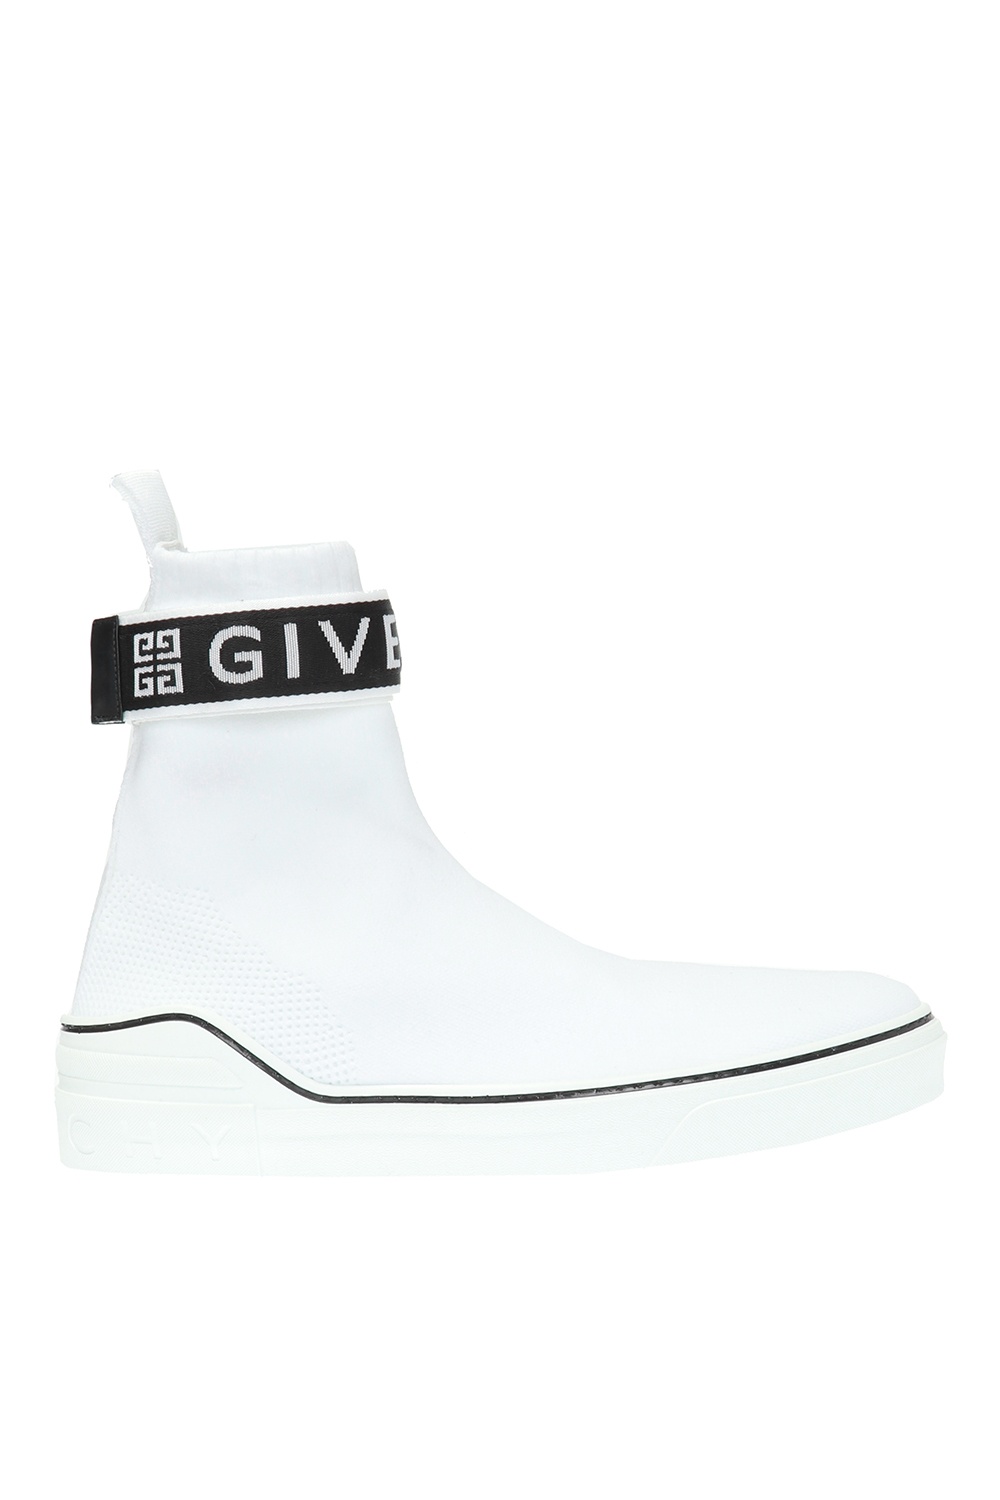 givenchy george v sneakers